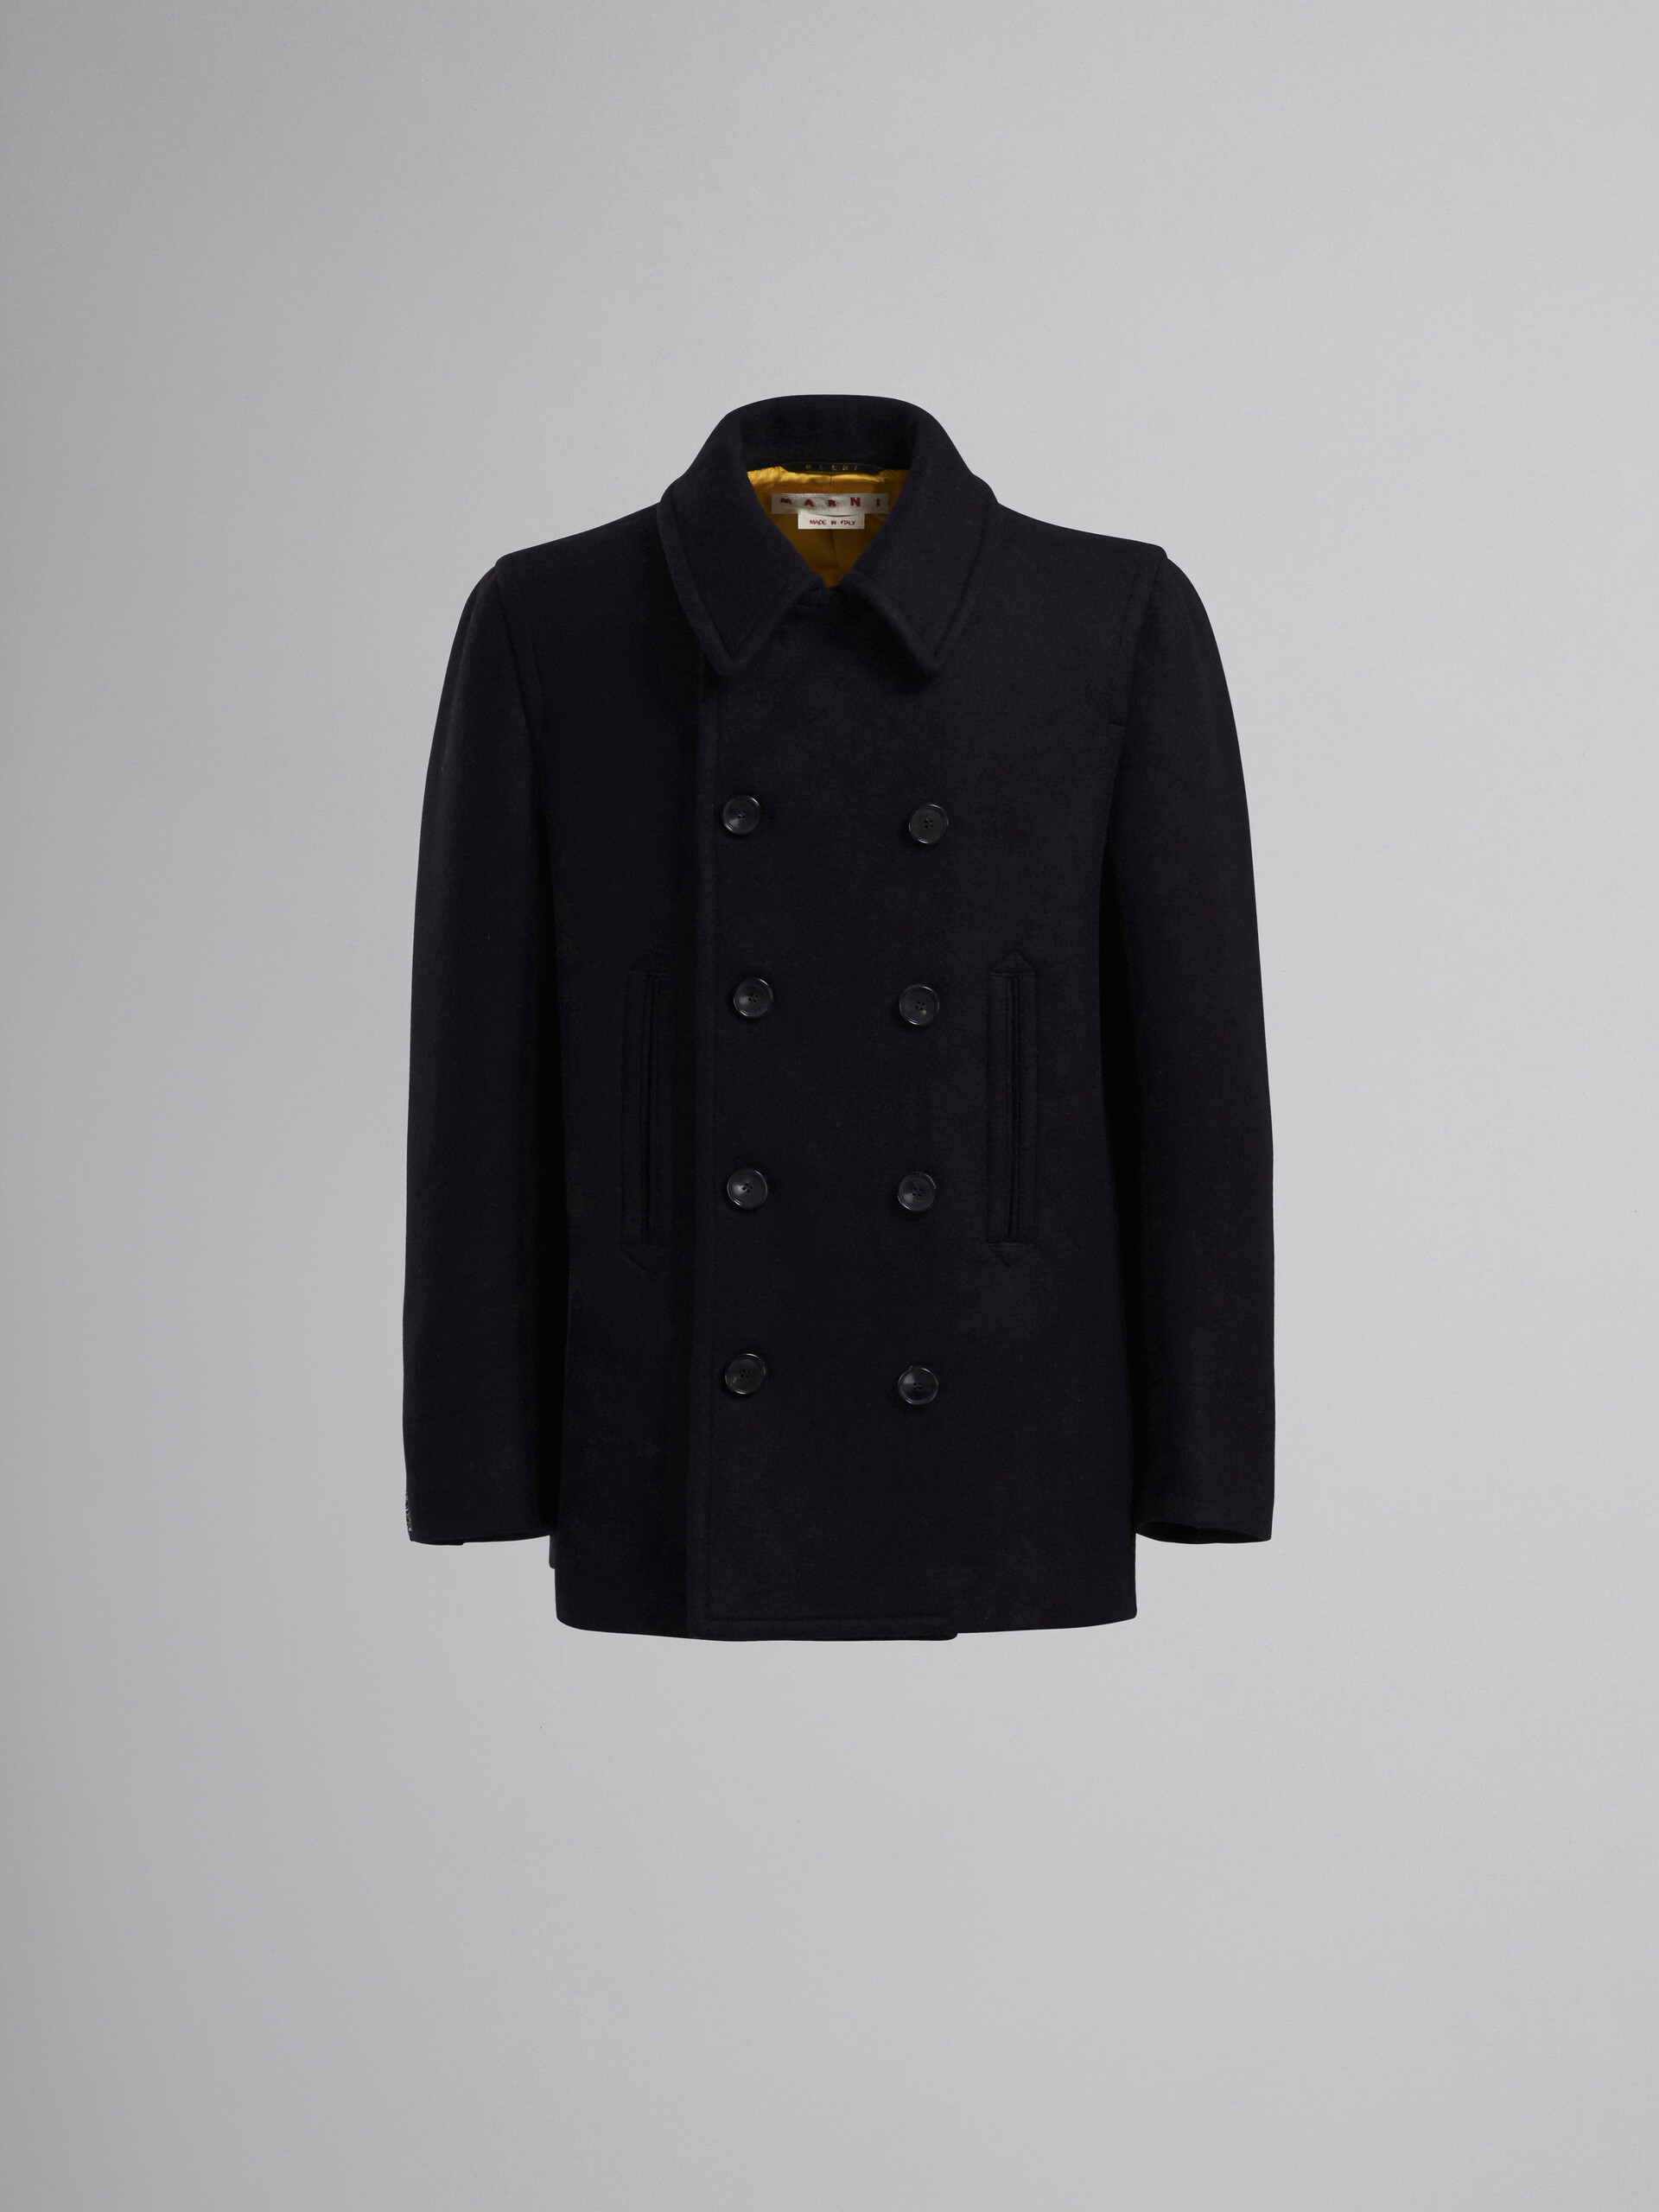 Black wool double-breasted peacoat - Jackets - Image 1